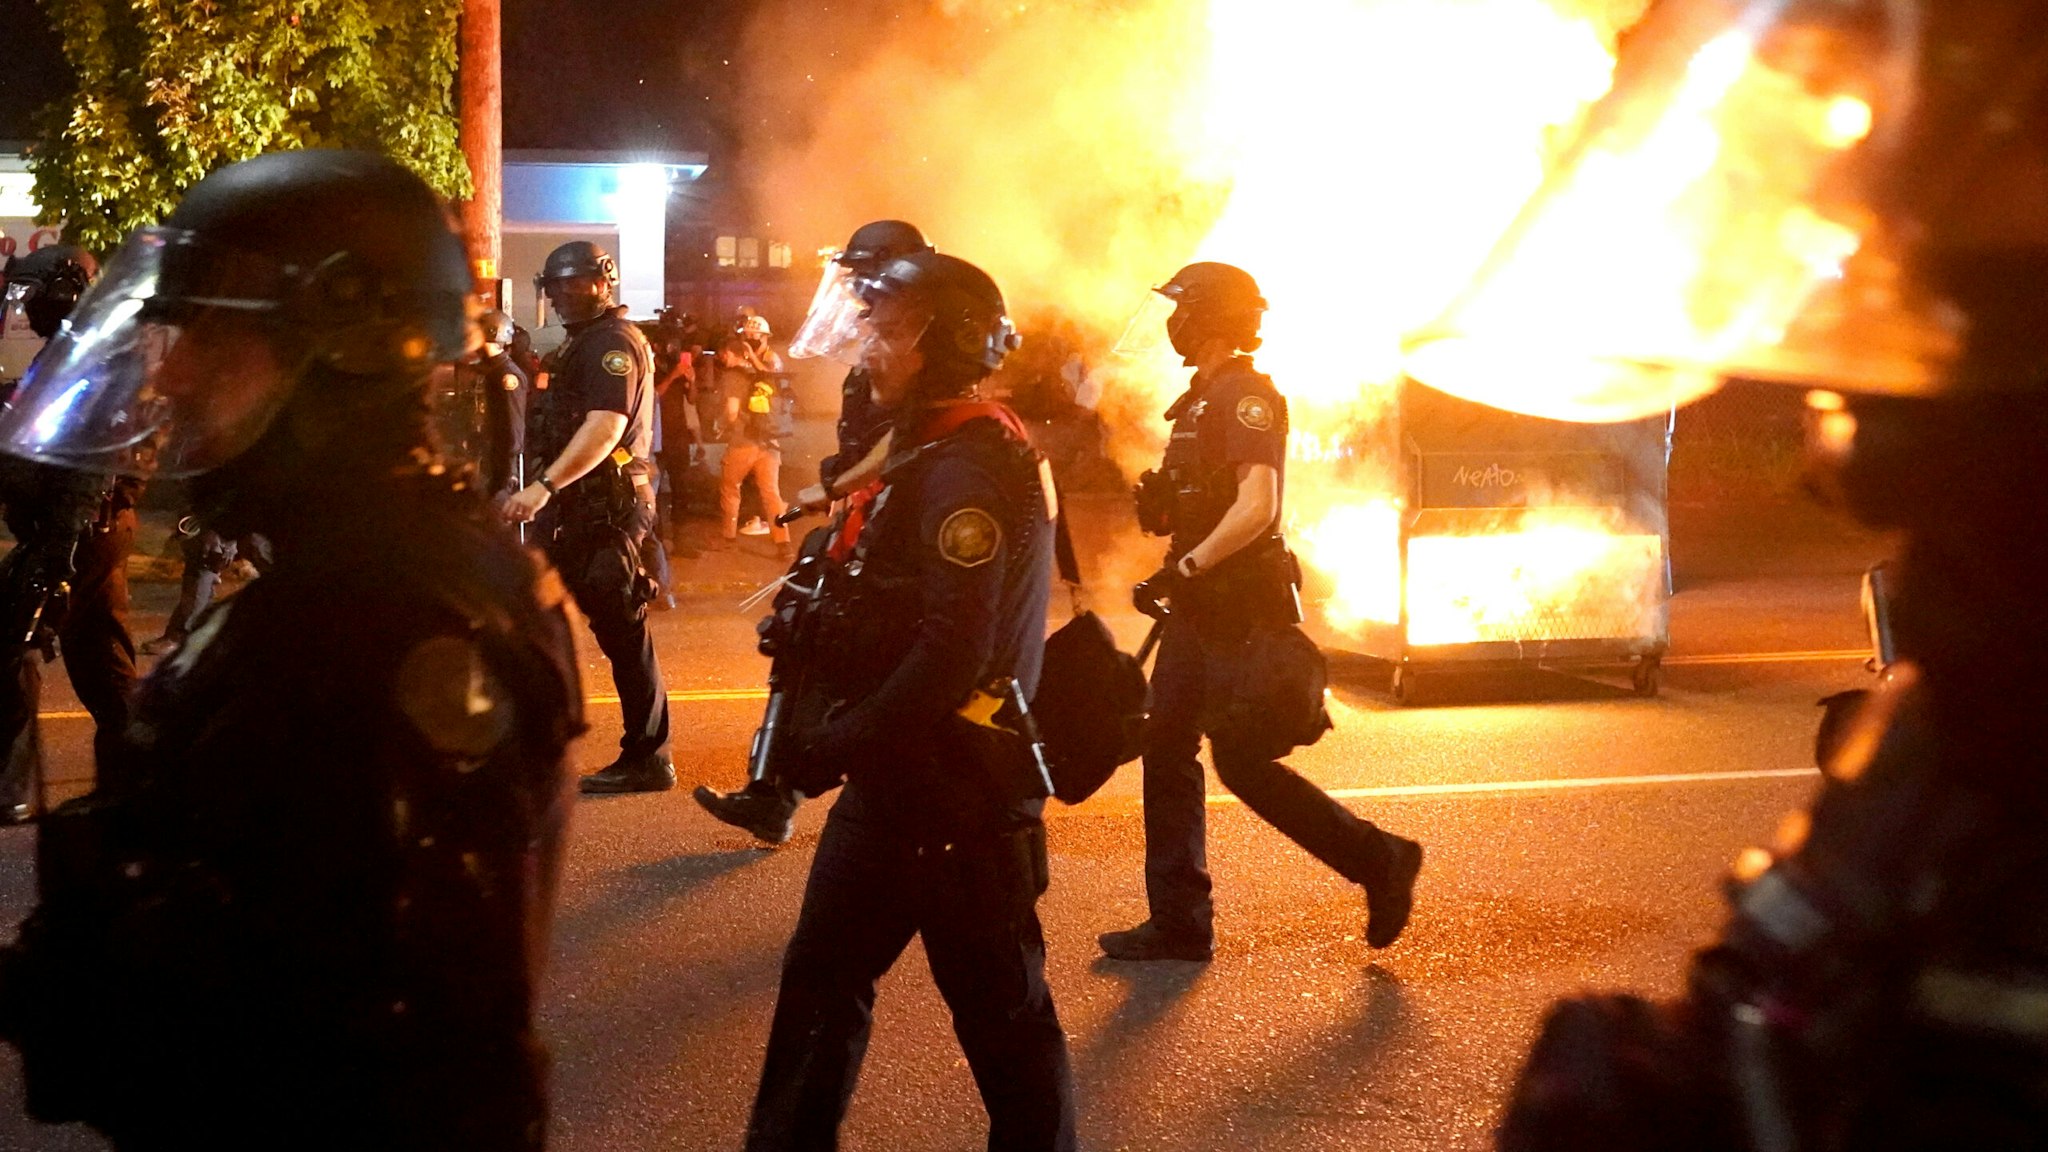 PORTLAND, OR - AUGUST 14: Portland police walk past a dumpster fire during a crowd dispersal on August 14, 2020 in Portland, Oregon. The Portland Police Bureau changed tactics Friday night, blocking streets well before the protest of about 400 people could reach the Portland Police Association building.